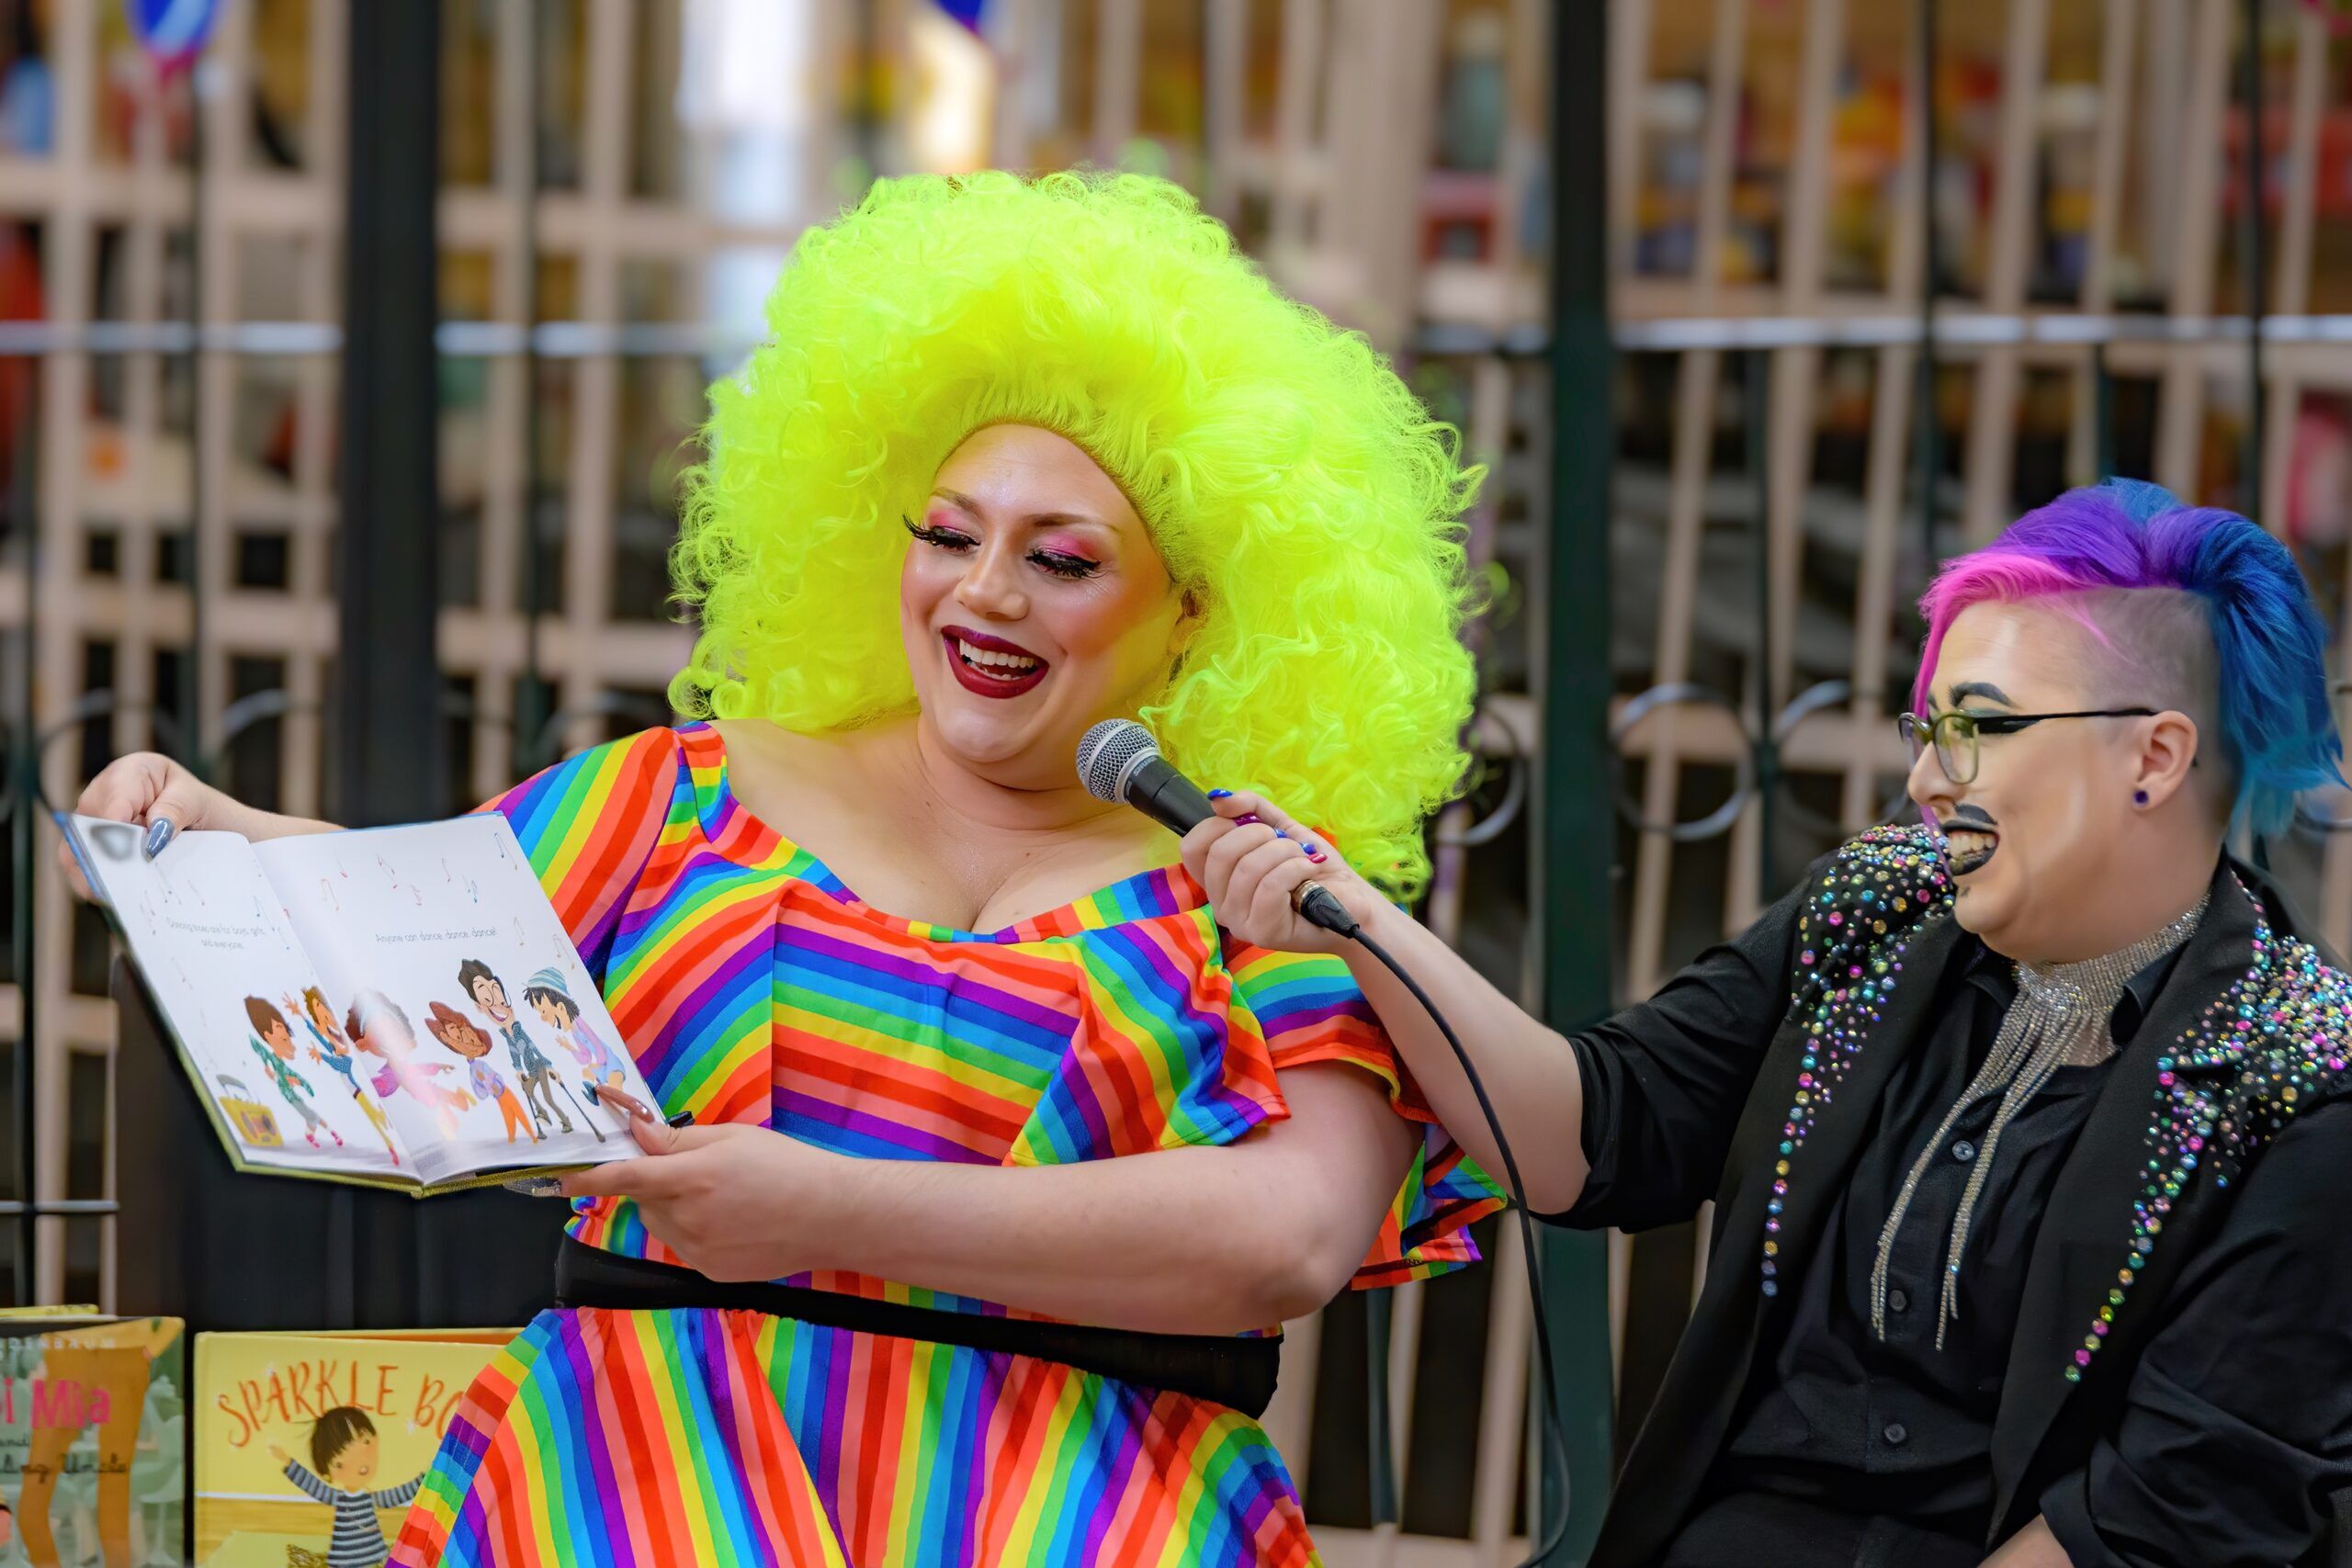 Saint John, NB, Canada - June 5, 2022: A drag queen and king read children's stories at the Drag Story Hour in Market Square. Focus on the queen.